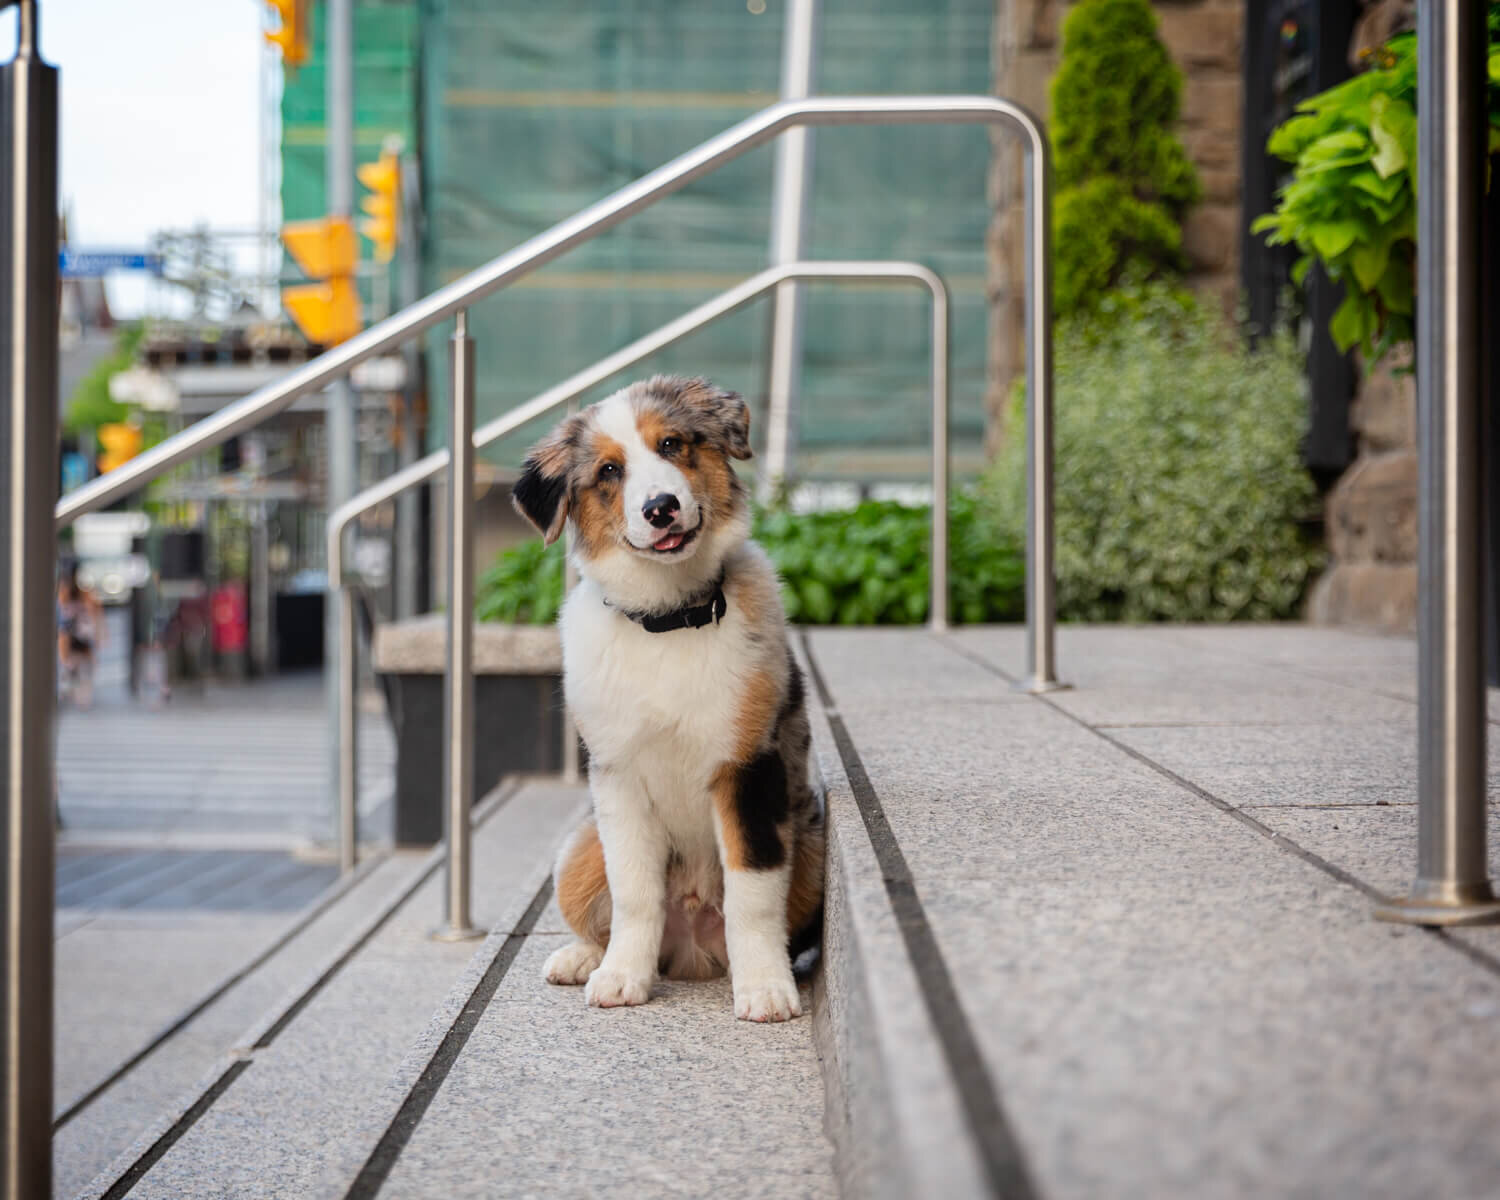 PUPPY FRAMED BY STAIR RAILINGS IN A CITY PHOTO SESSION